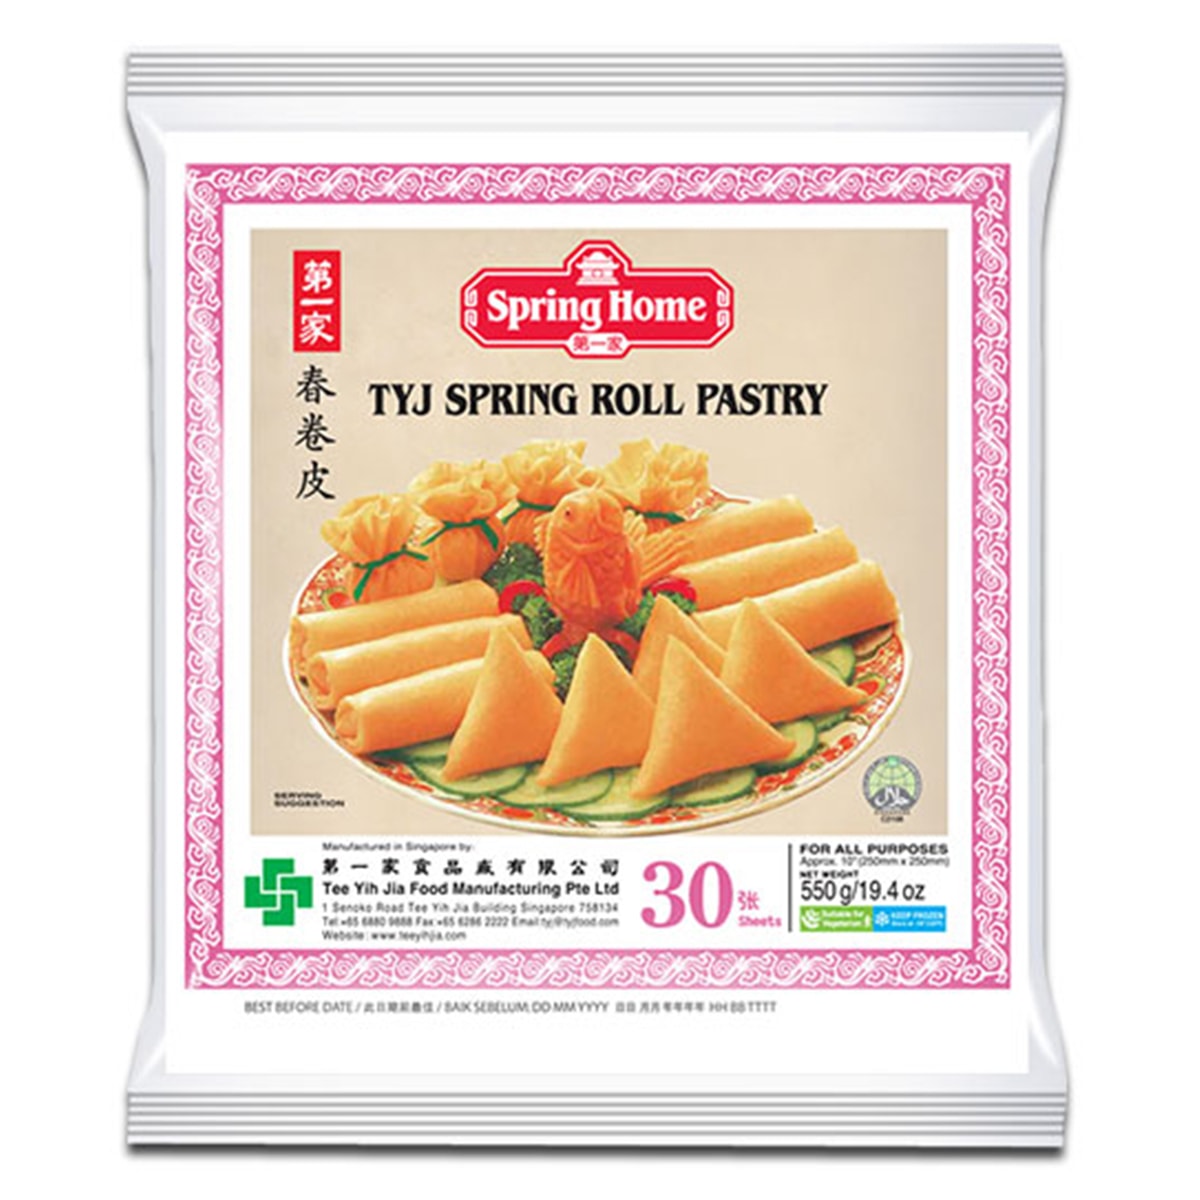 Frozen Tyg Spring Roll Pastry 30 Sheets [10 Inch (250mm) Square](Plain) - 550 gm